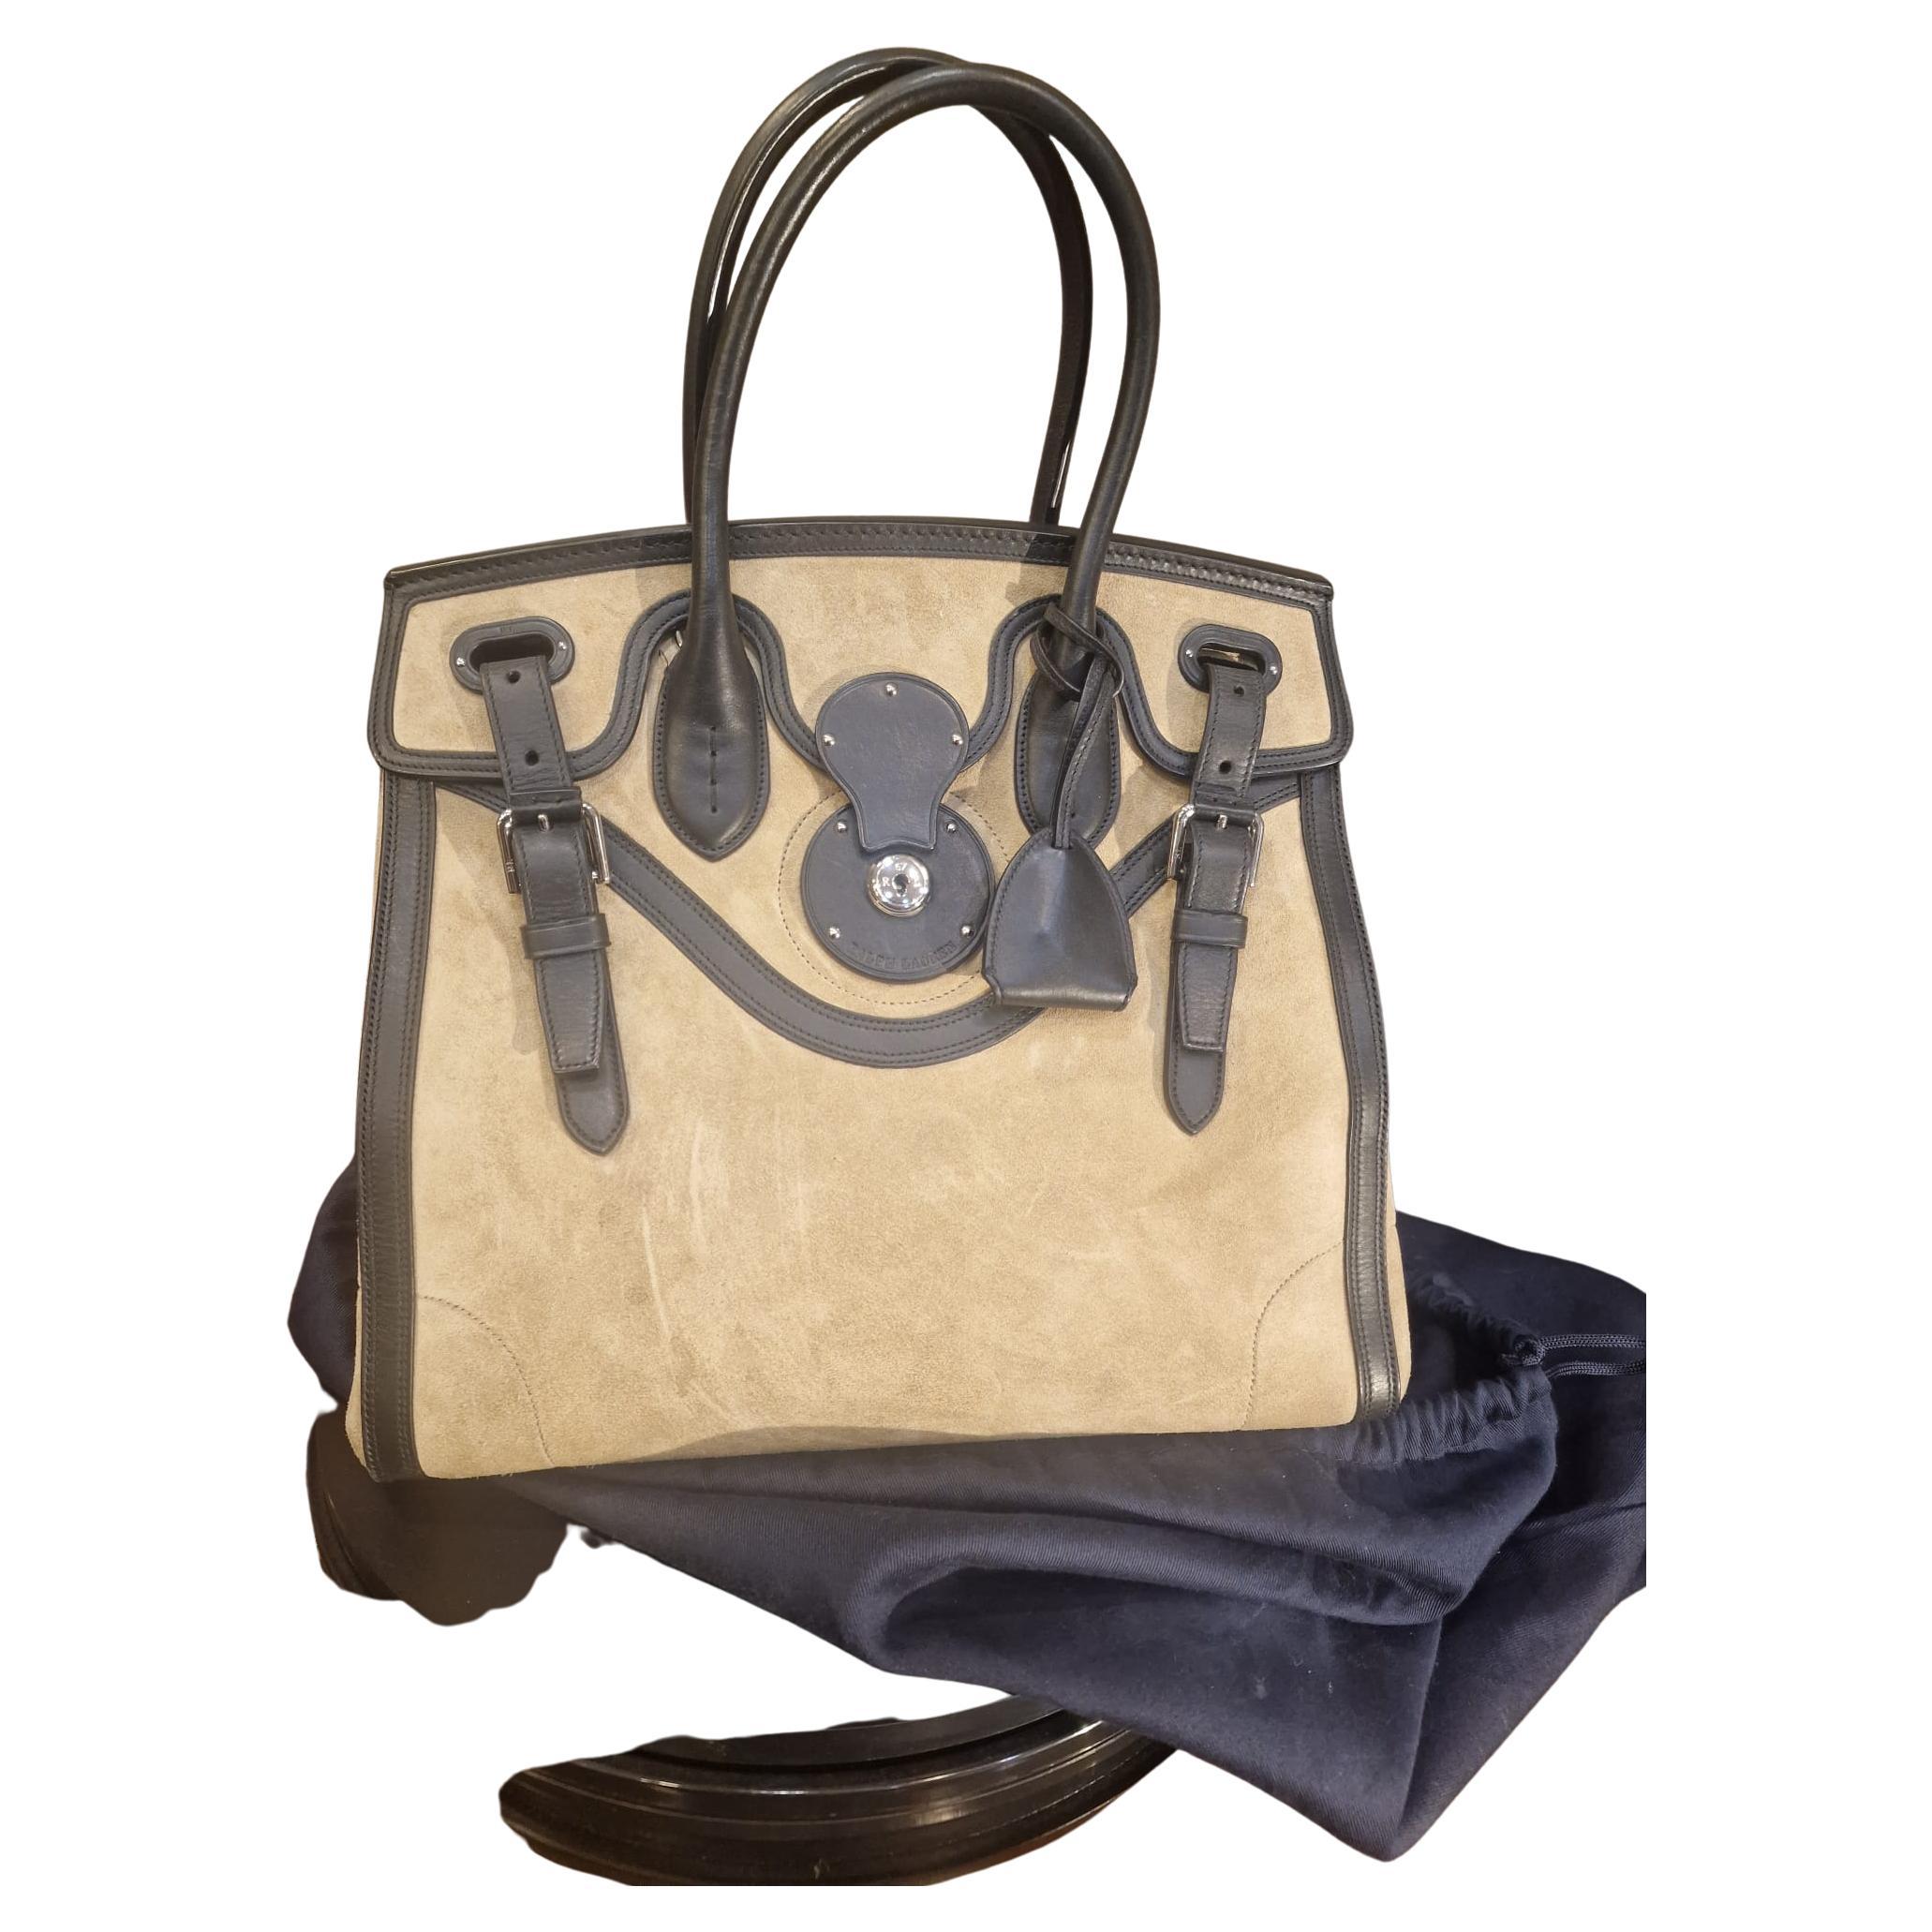 Gorgeous  handbag, the classic RALPH LAUREN COLLECTION , model Ricky , in beige suede and black leather, very elegant, in very good condition, only 2 seasons ago.
Very little use, it is a classic, a collector's item. carry a shoulder